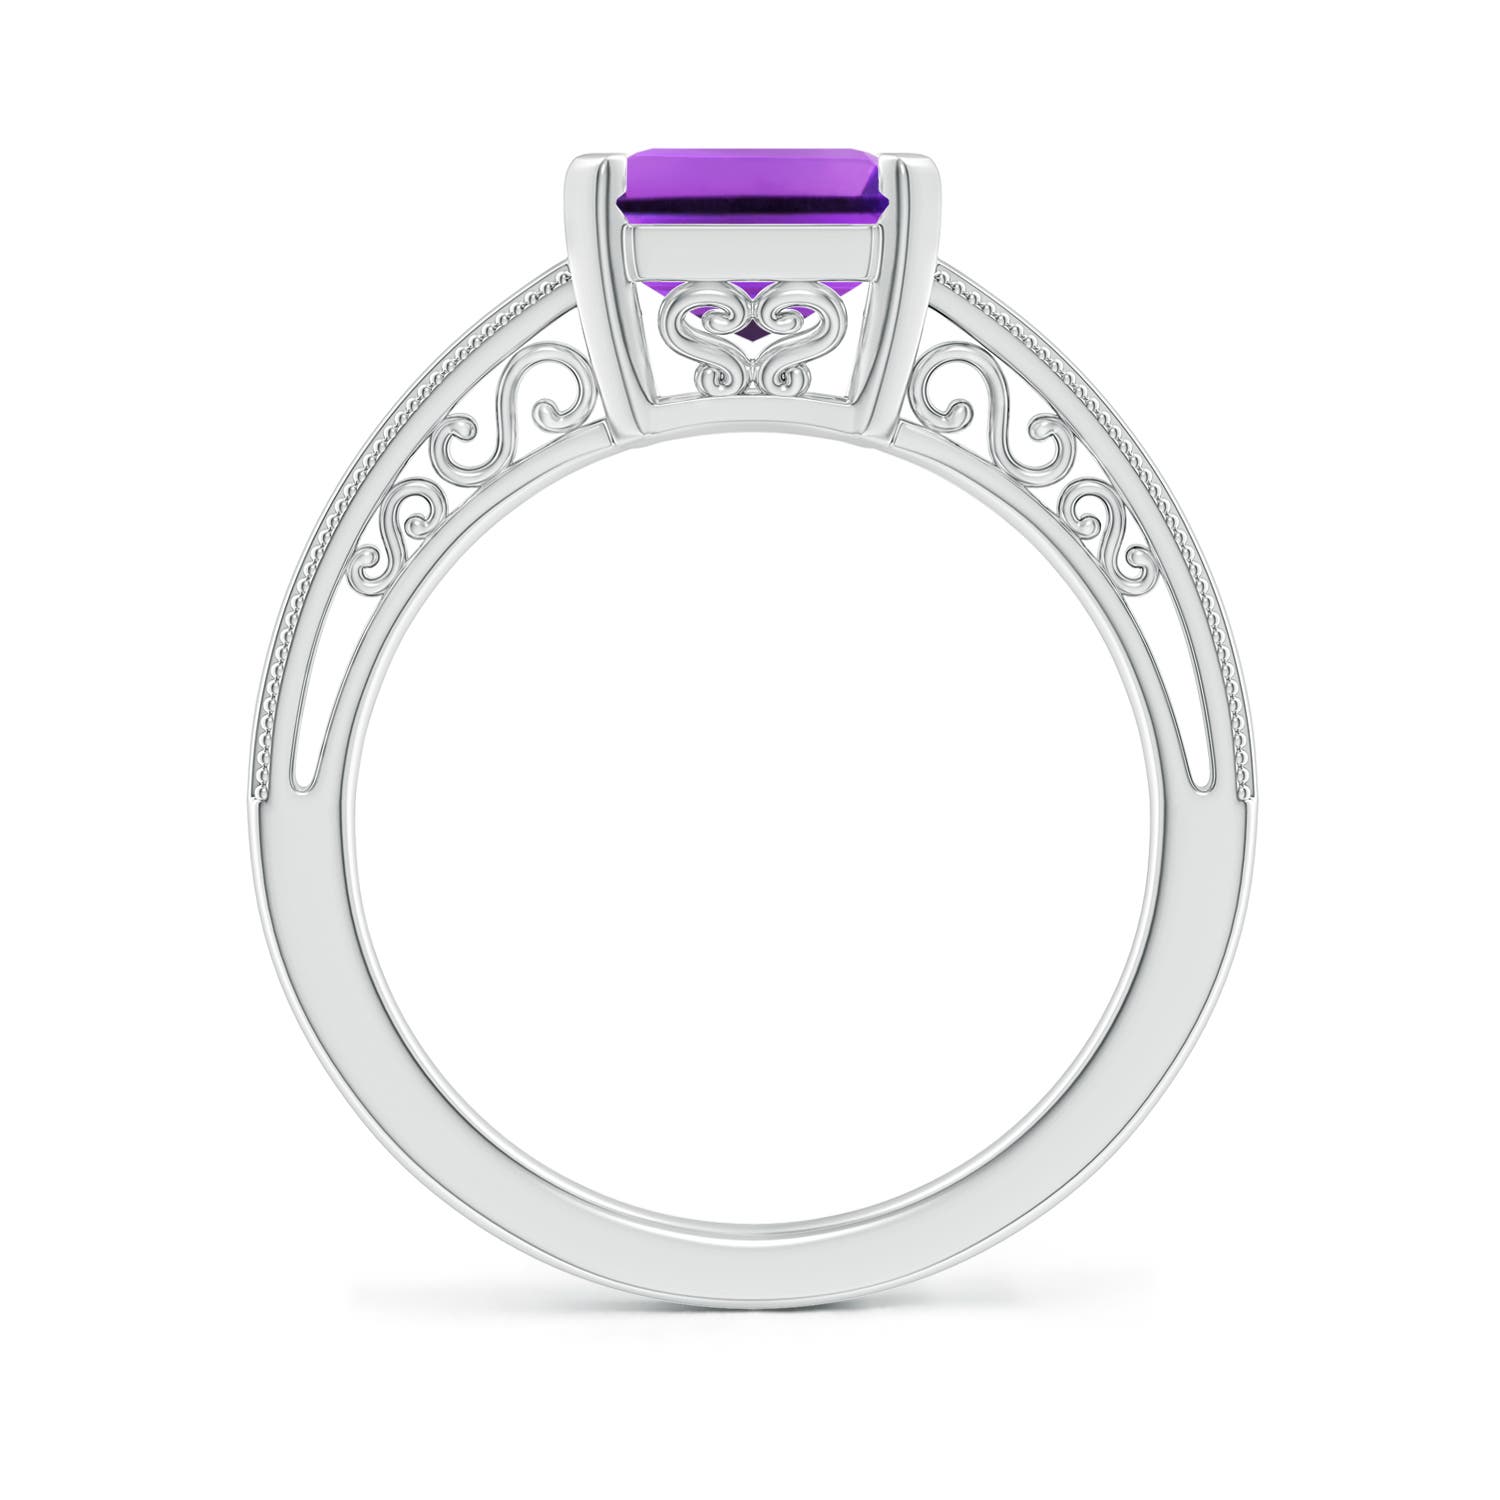 AAA - Amethyst / 2.9 CT / 14 KT White Gold